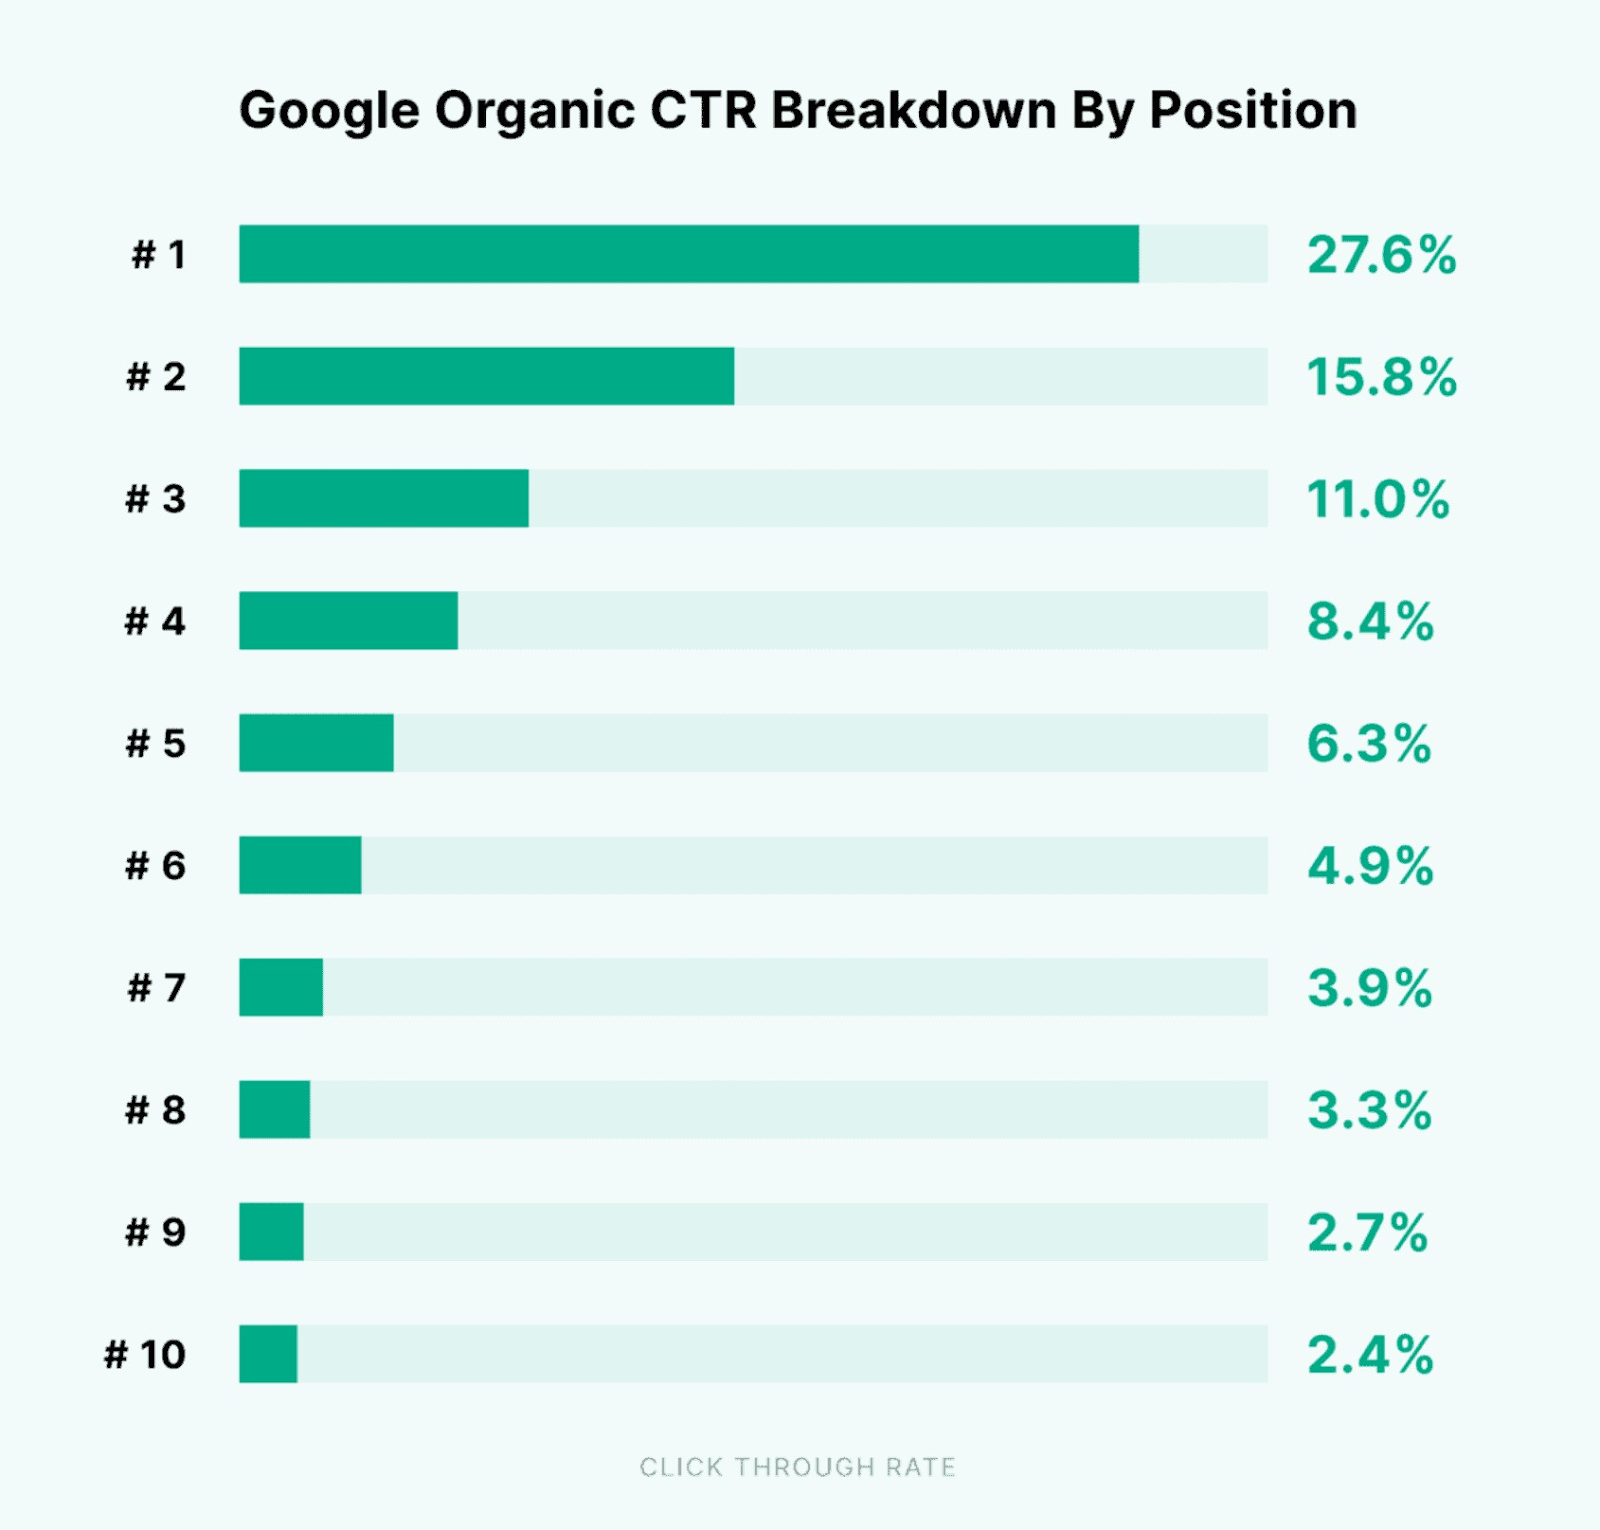 "Google organic CTR breakdown by position" graph from the Backlinko study